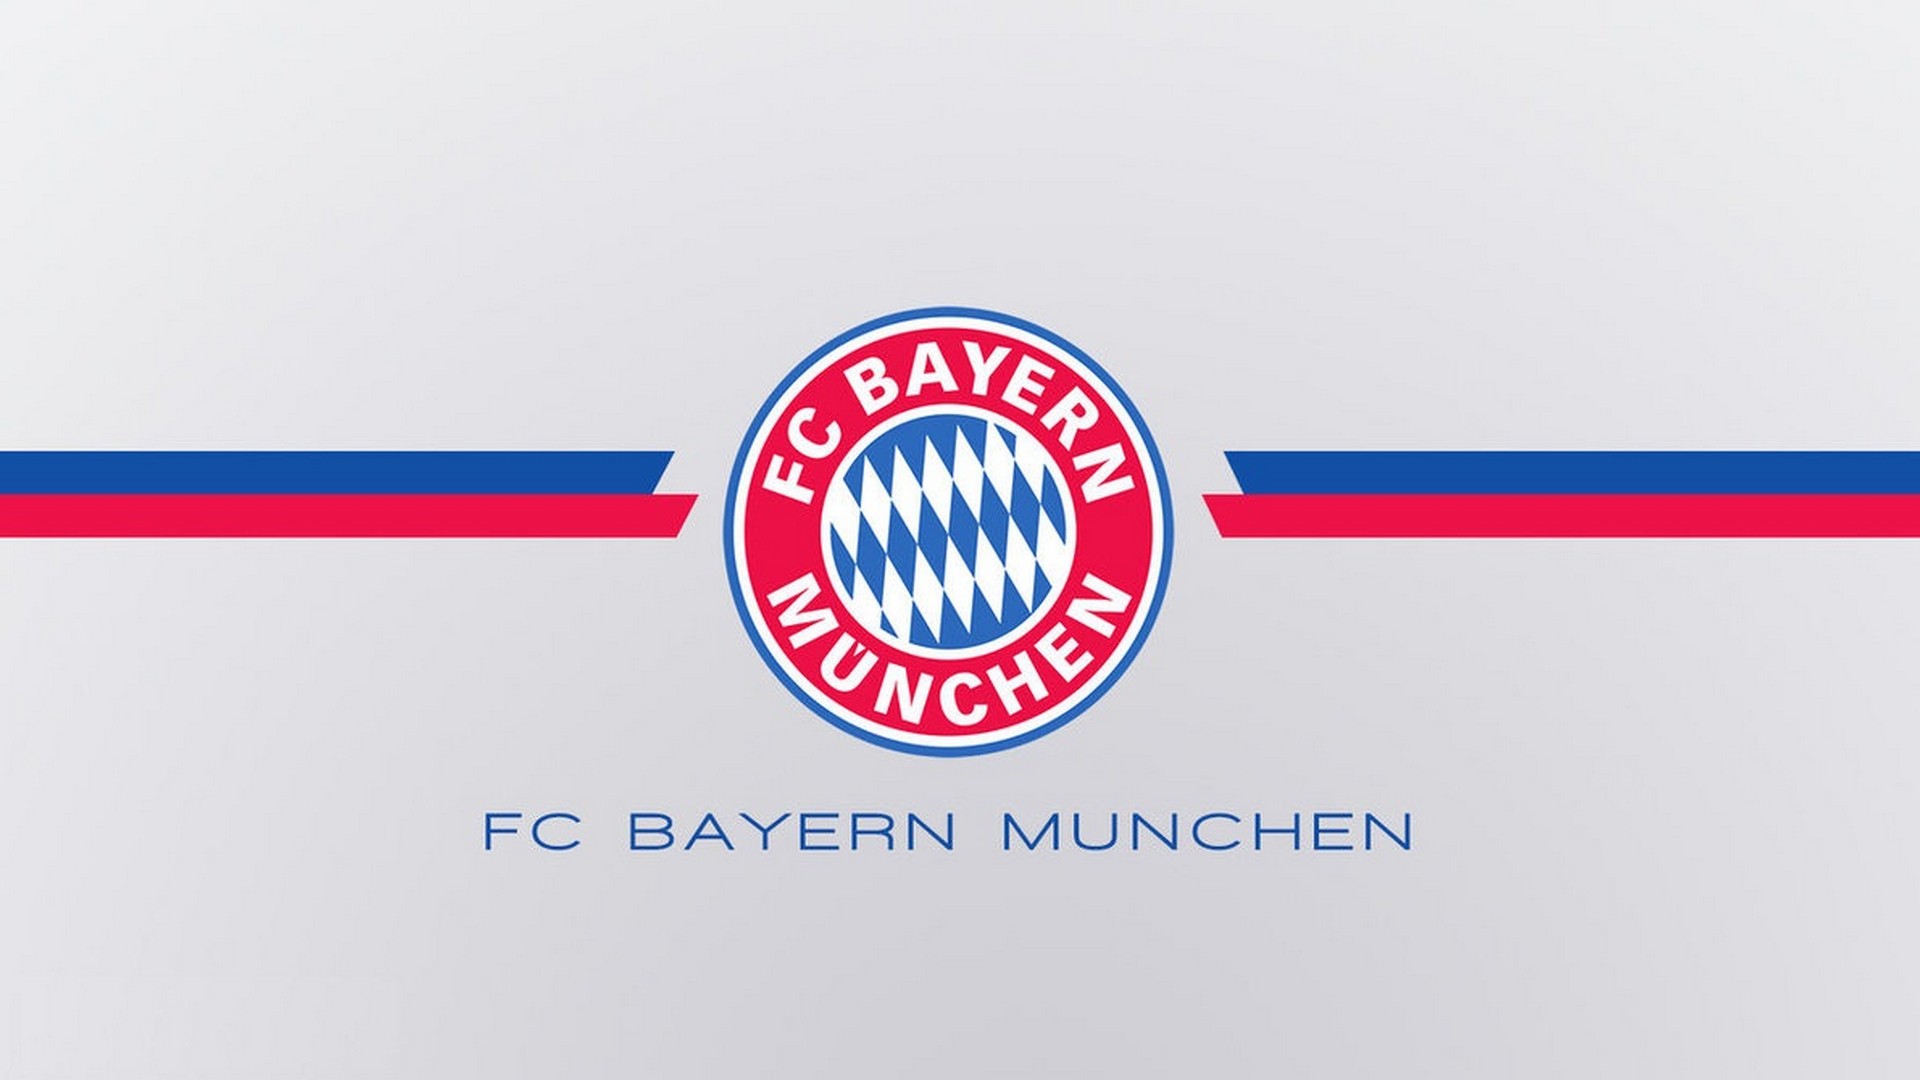 HD FC Bayern Munchen Backgrounds with resolution 1920x1080 pixel. You can make this wallpaper for your Mac or Windows Desktop Background, iPhone, Android or Tablet and another Smartphone device